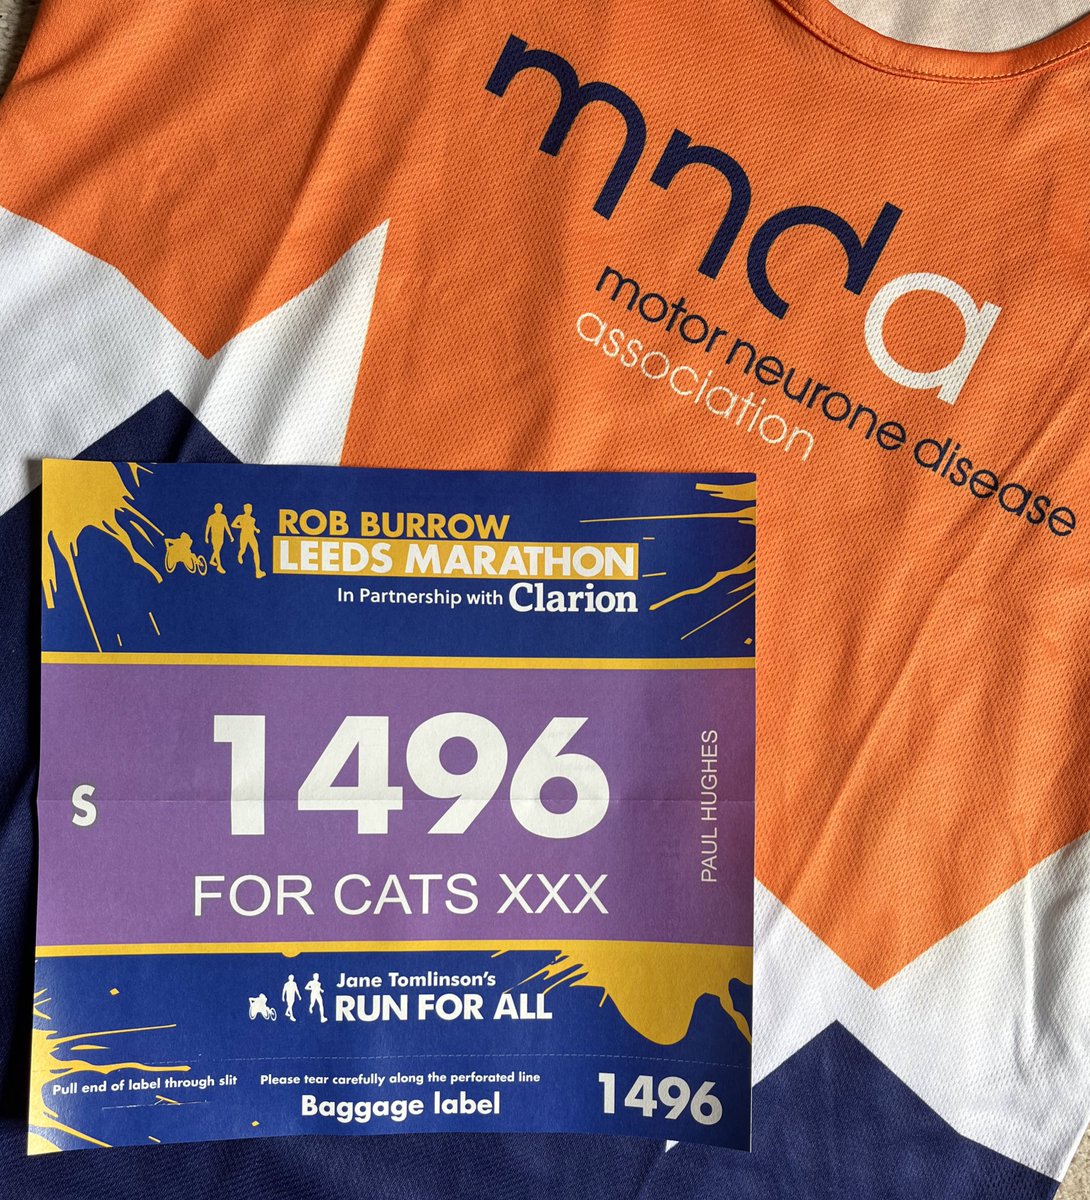 1 week today is the @runforall @Rob7Burrow Marathon! Feeling real now! 😬 Thanks to everyone who has donated so far - it’s really appreciated and is for such a worthwhile cause! justgiving.com/fundraising/pa… @mndassoc #MND